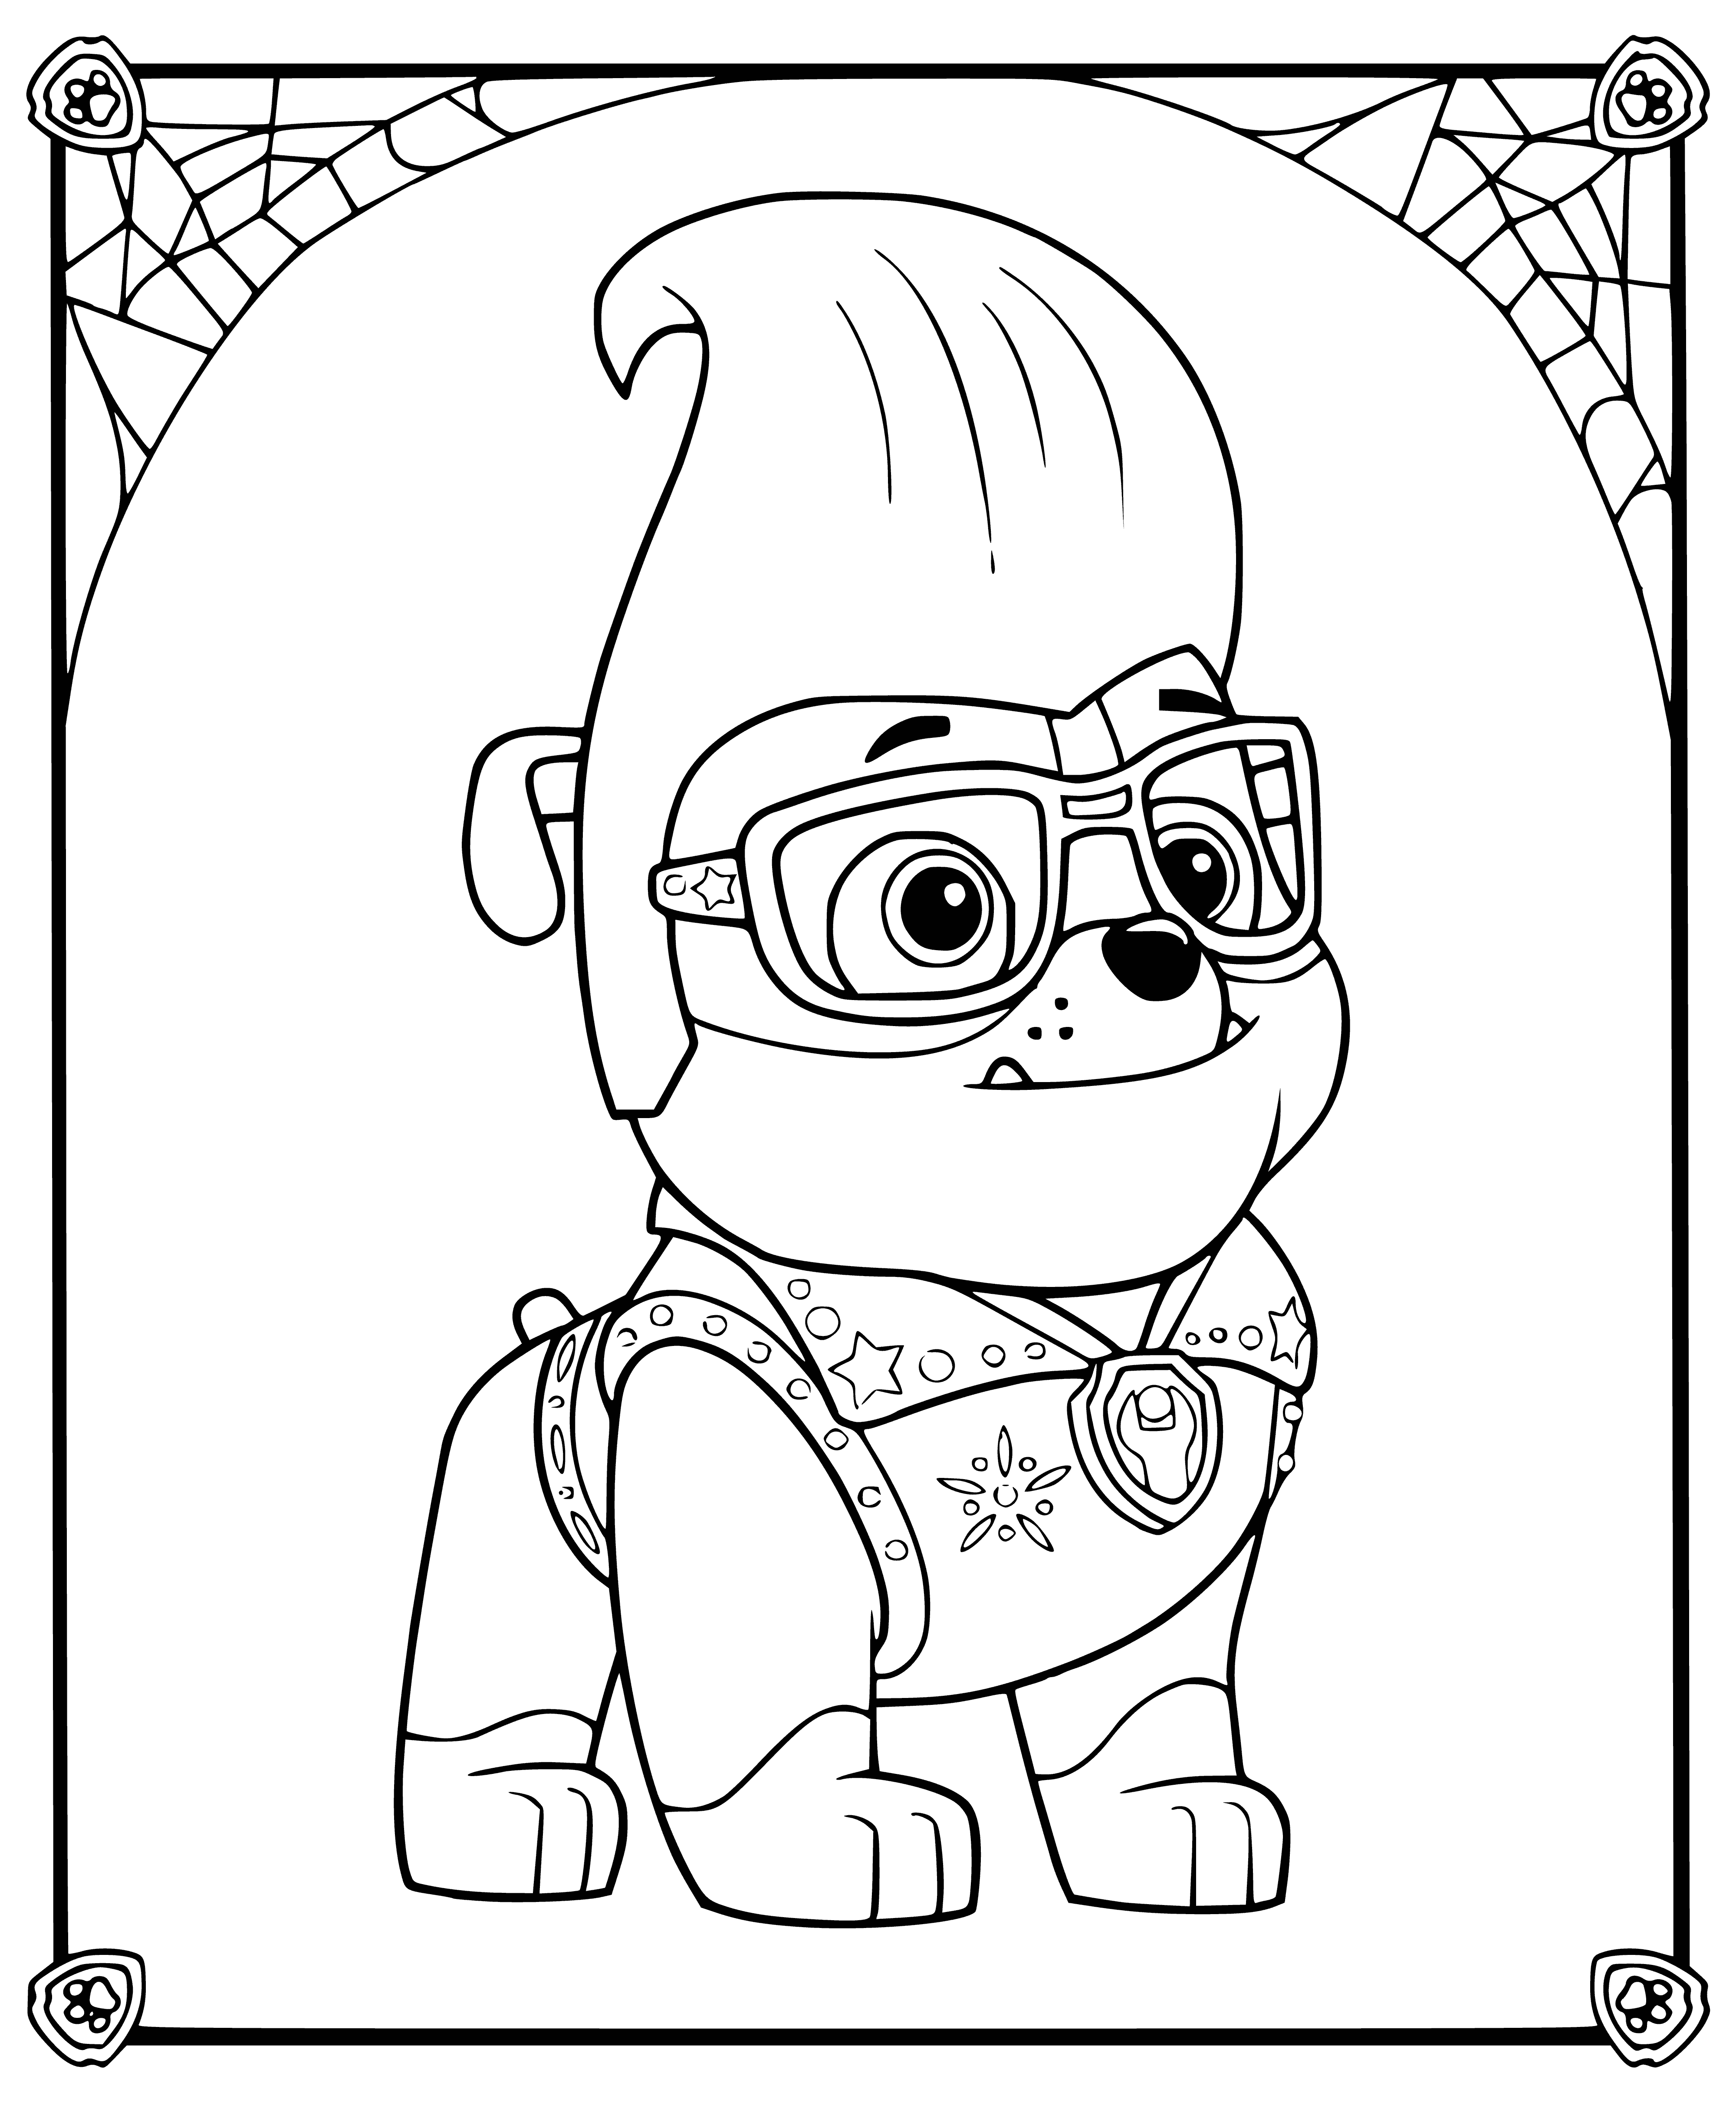 You're a rock star coloring page